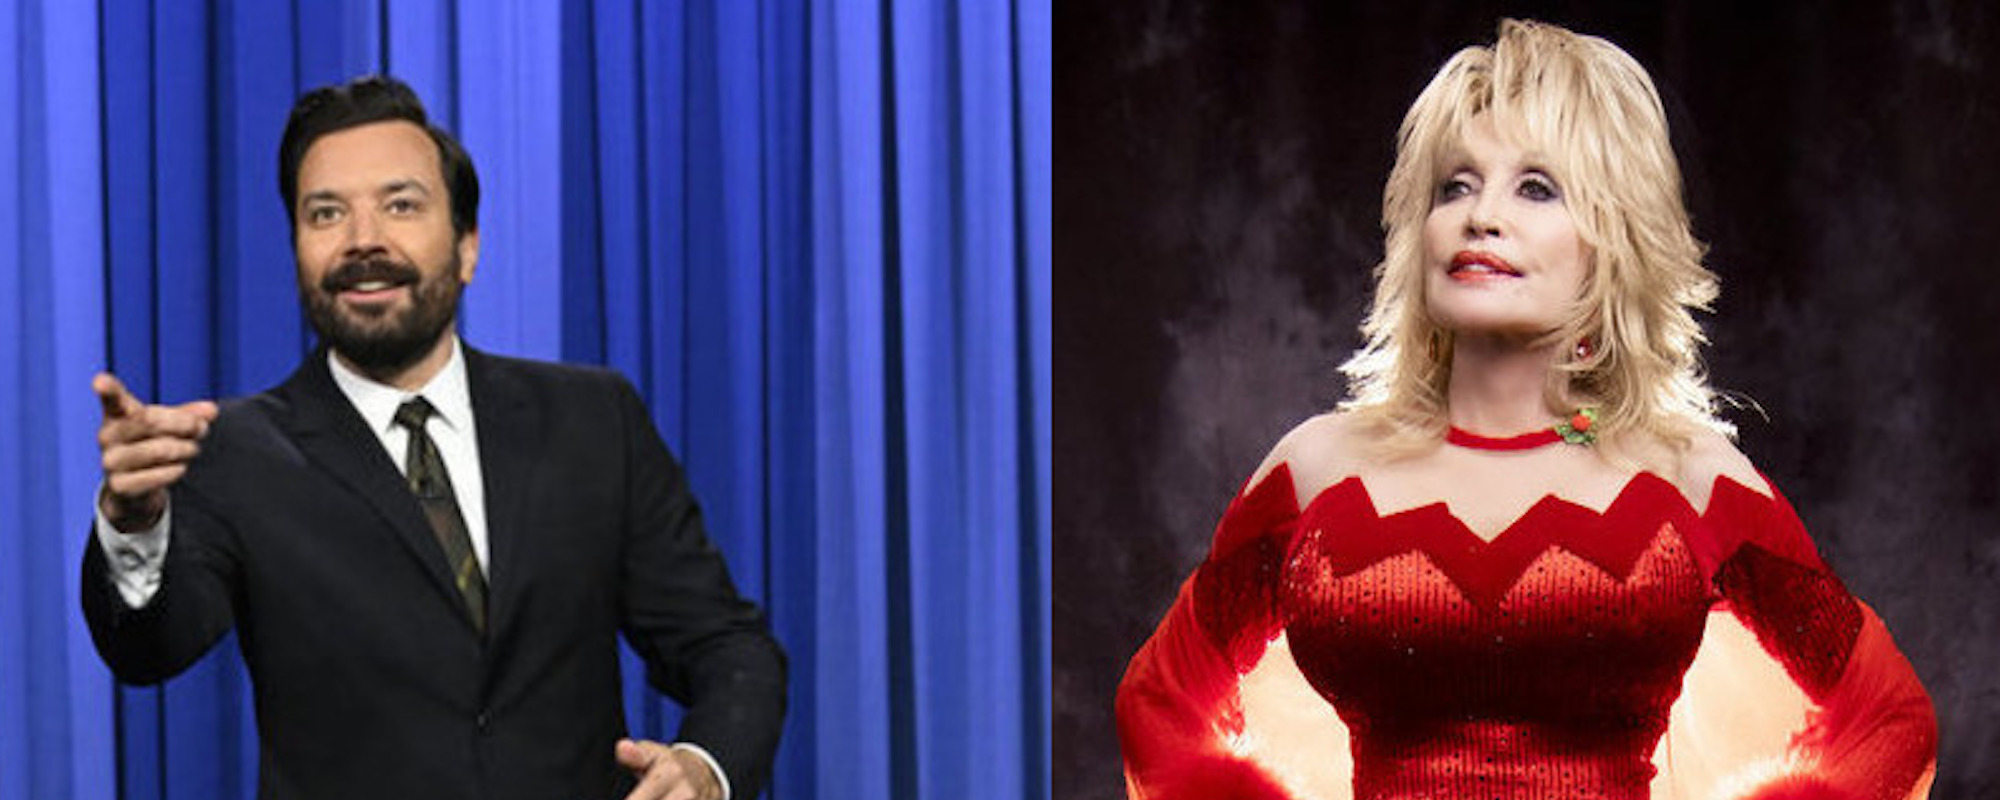 Jimmy Fallon Shares New Holiday Duet with Dolly Parton “Almost Too Early for Christmas”